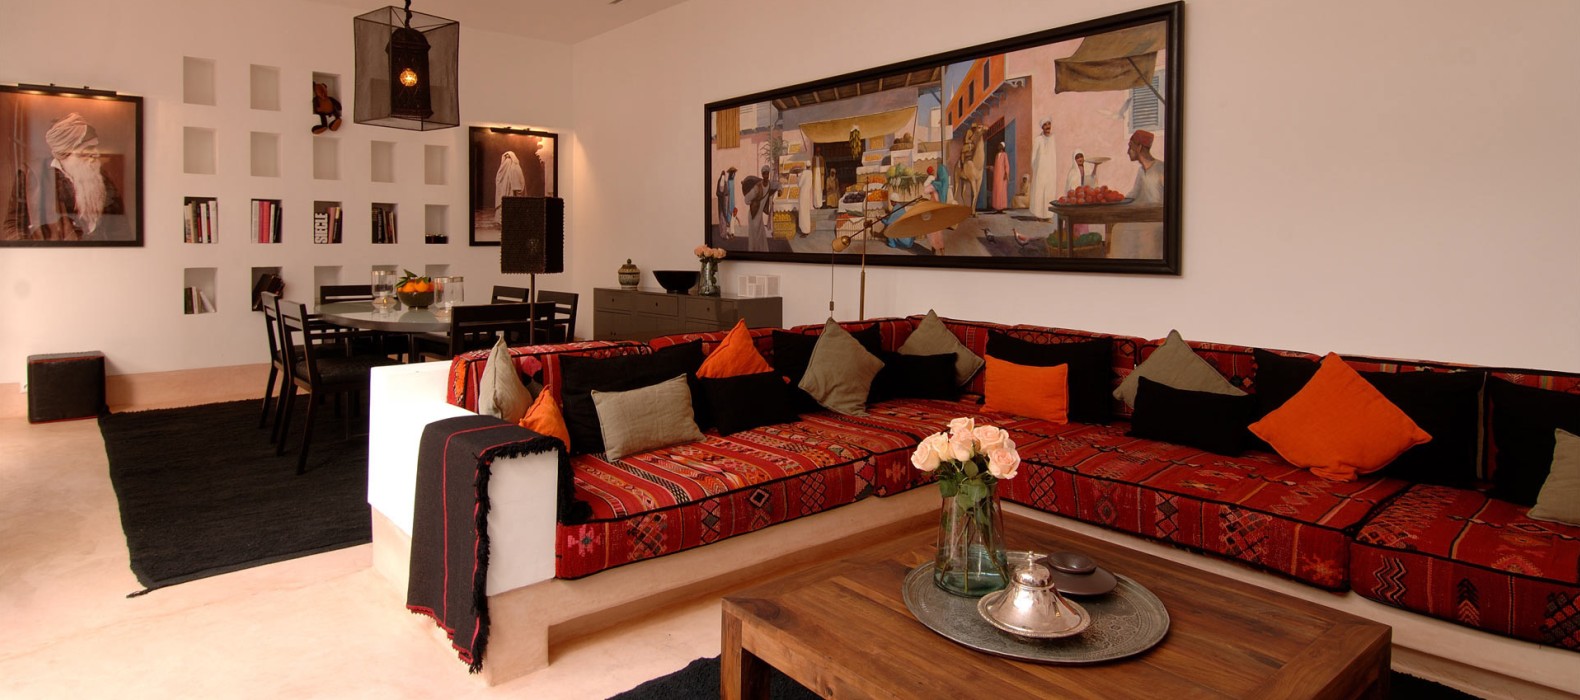 Living room of Riad Zahria in Marrakech